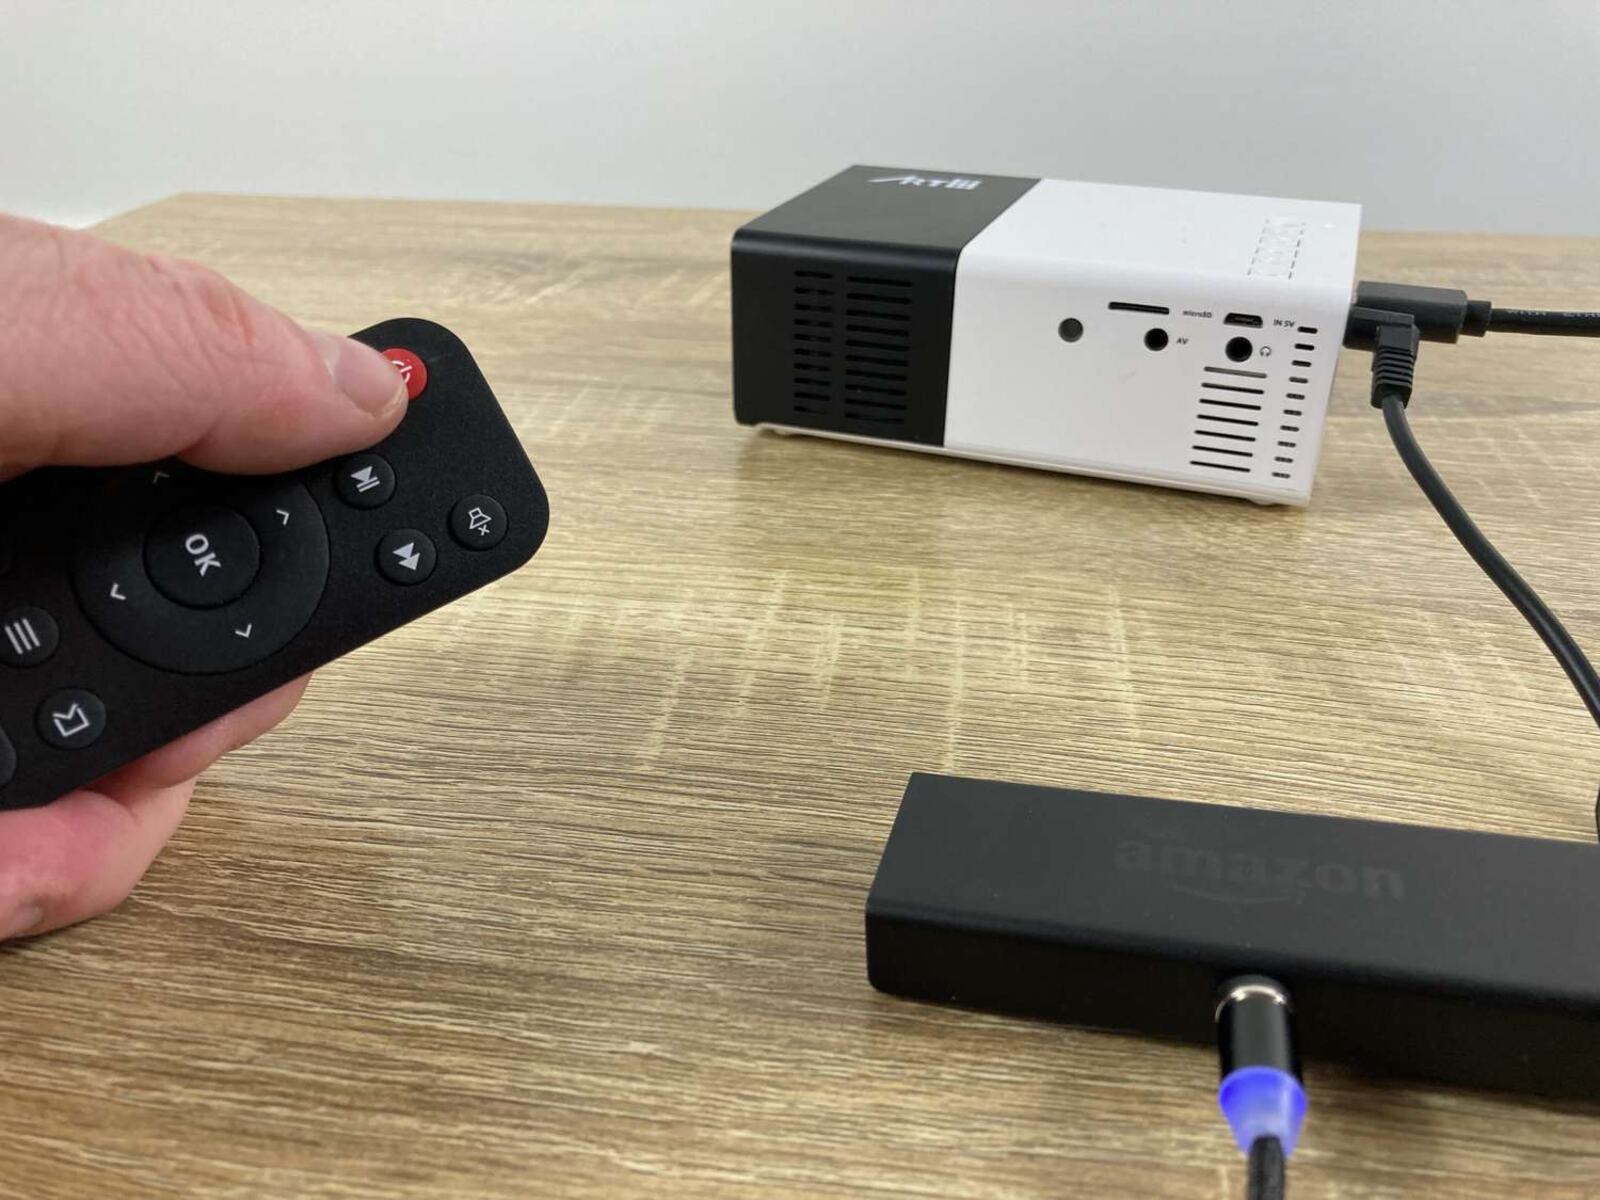 How To Use Firestick On Projector